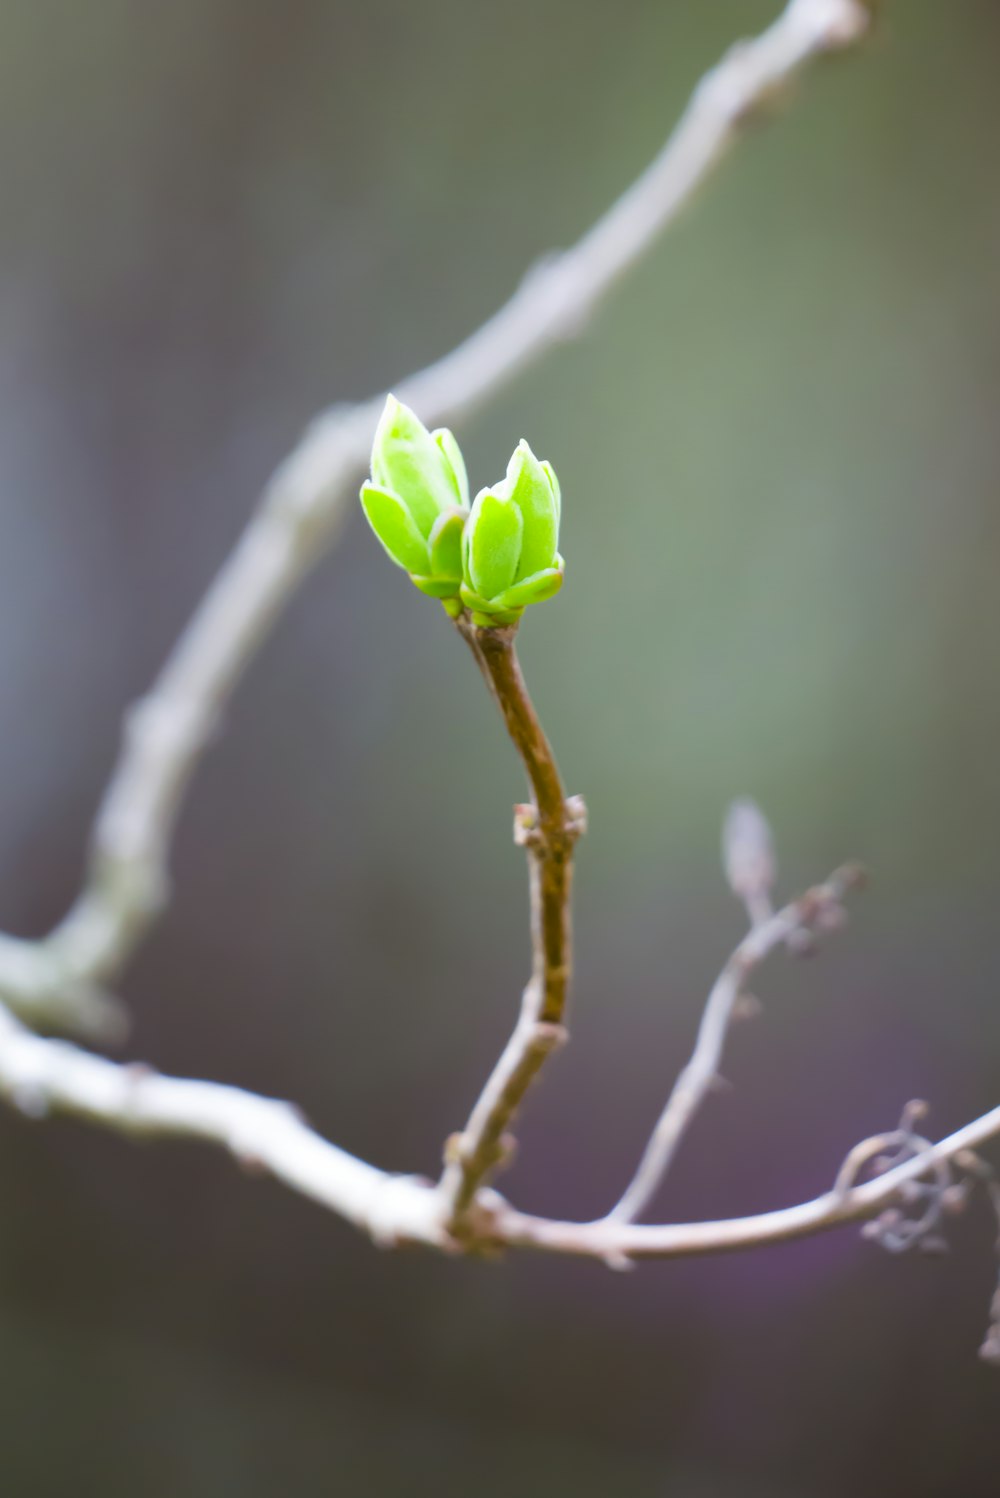 a small branch with two green leaves on it